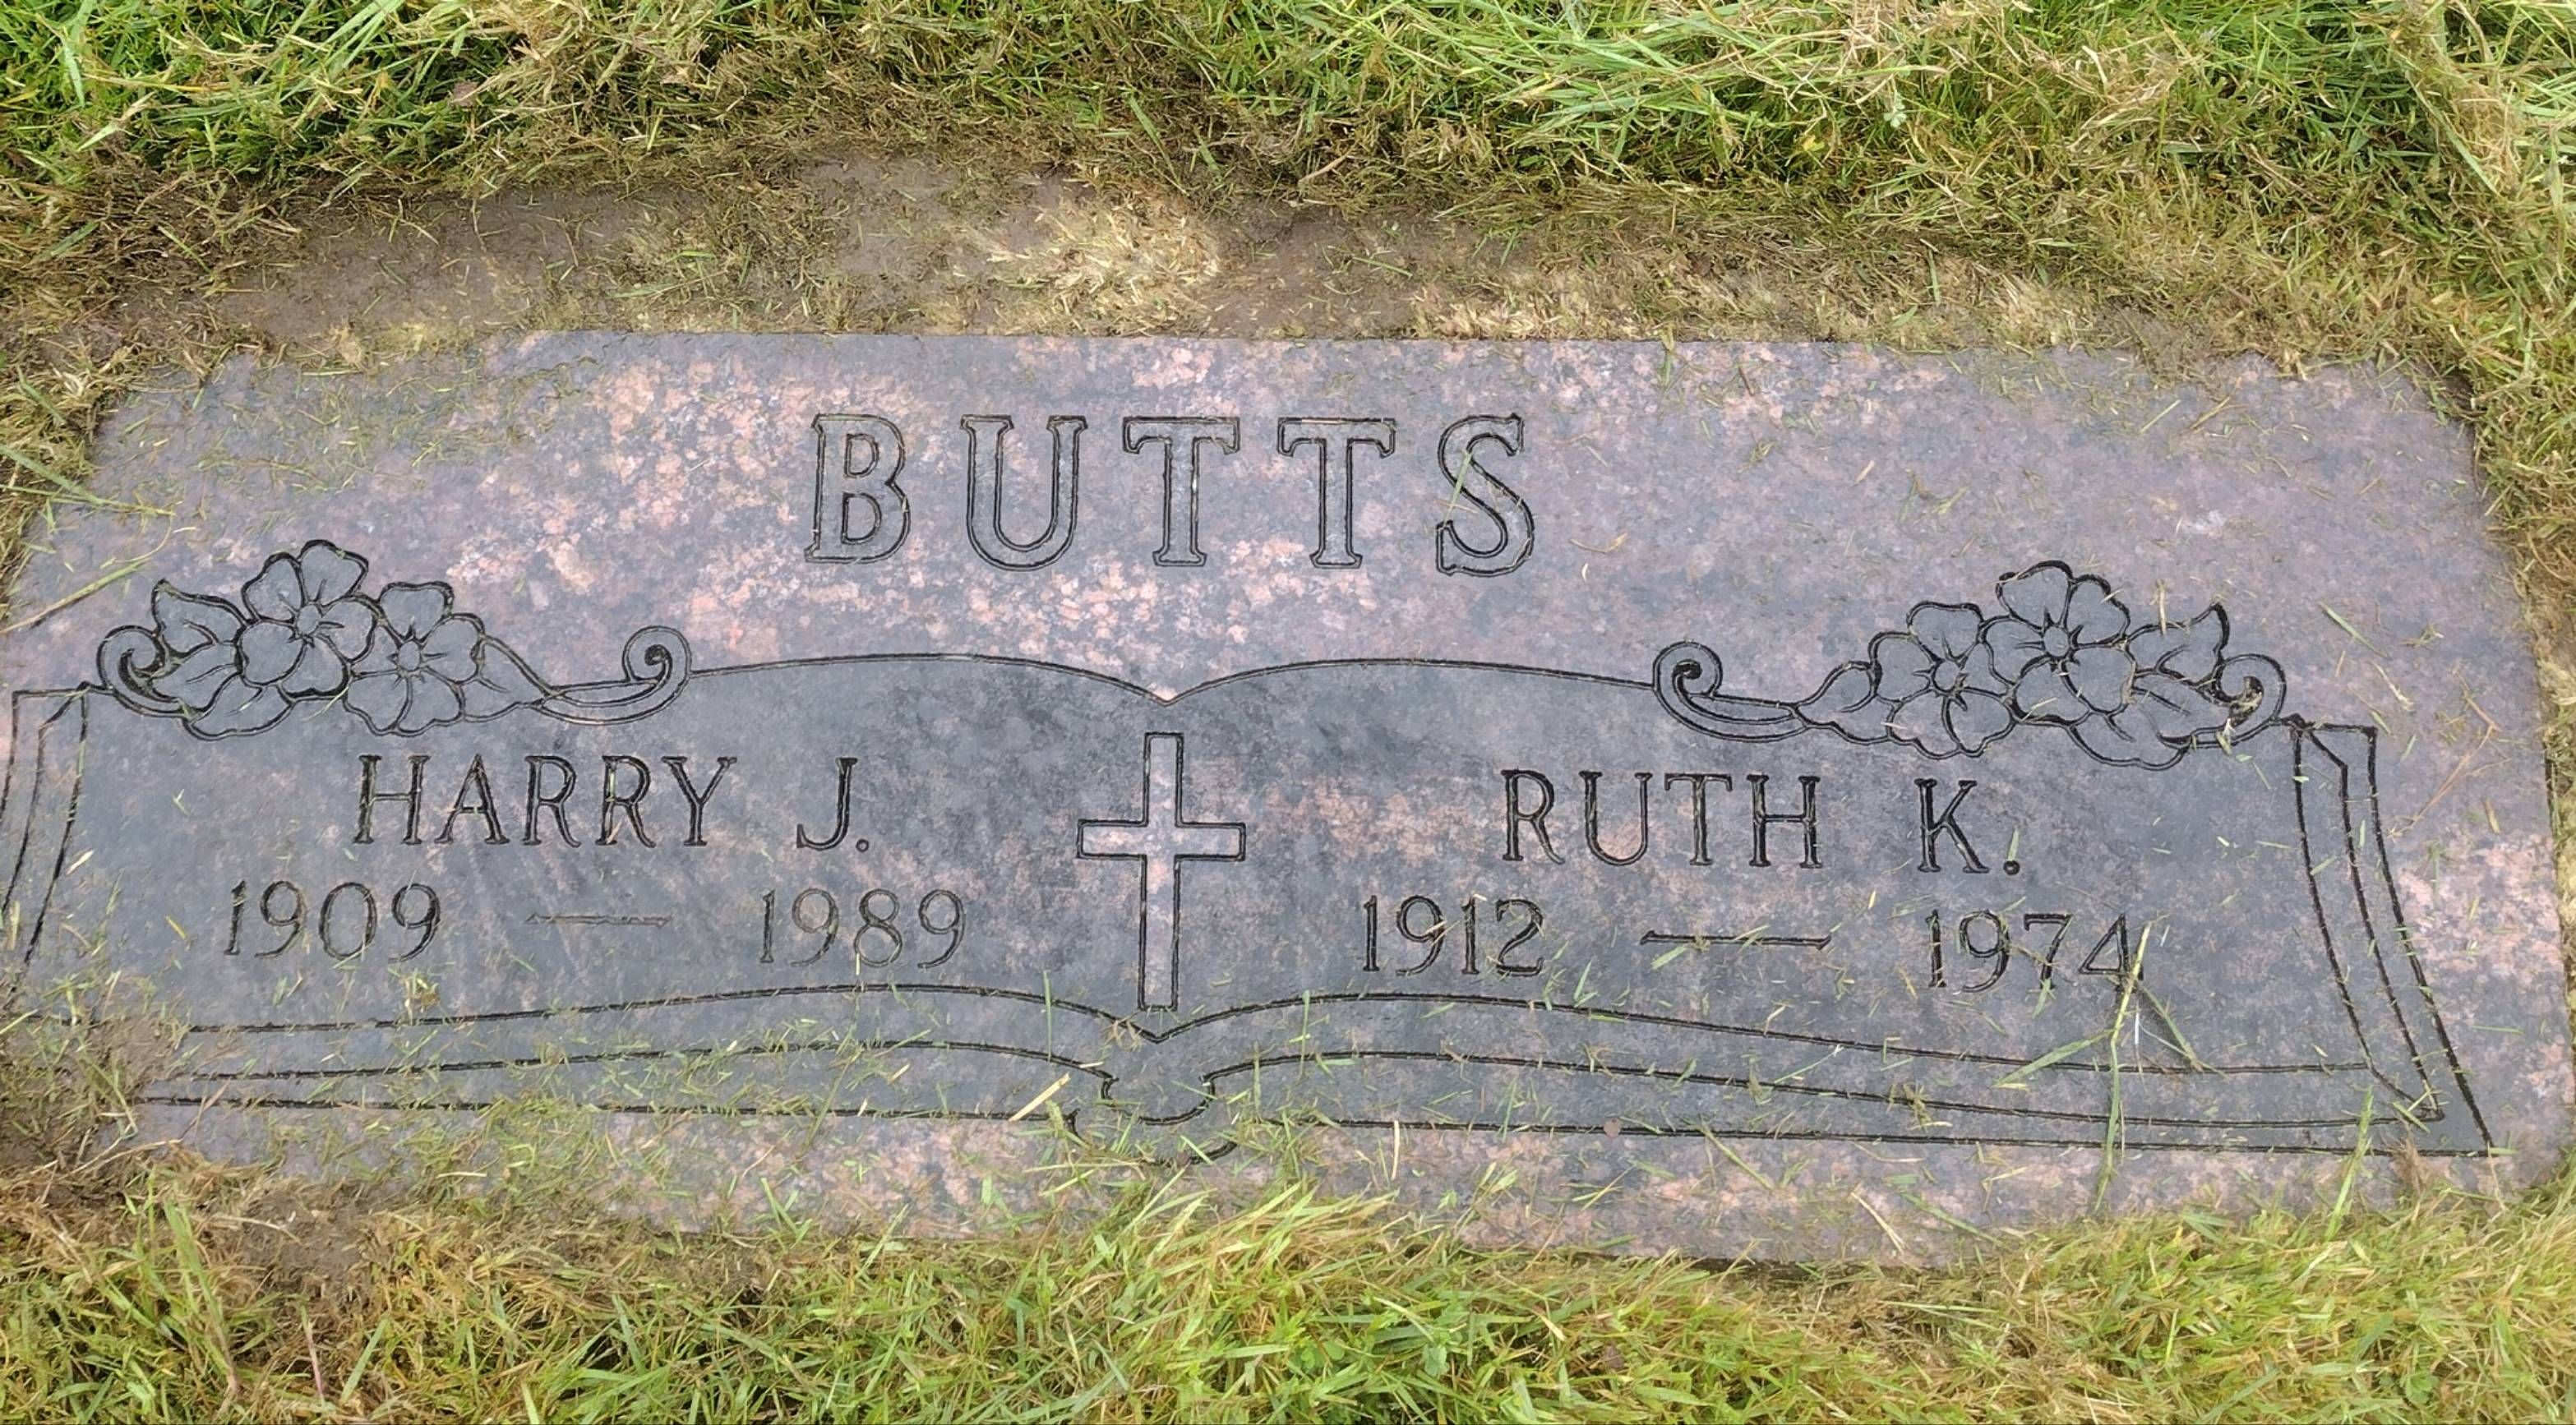 I bet Harry Butts had a rough childhood